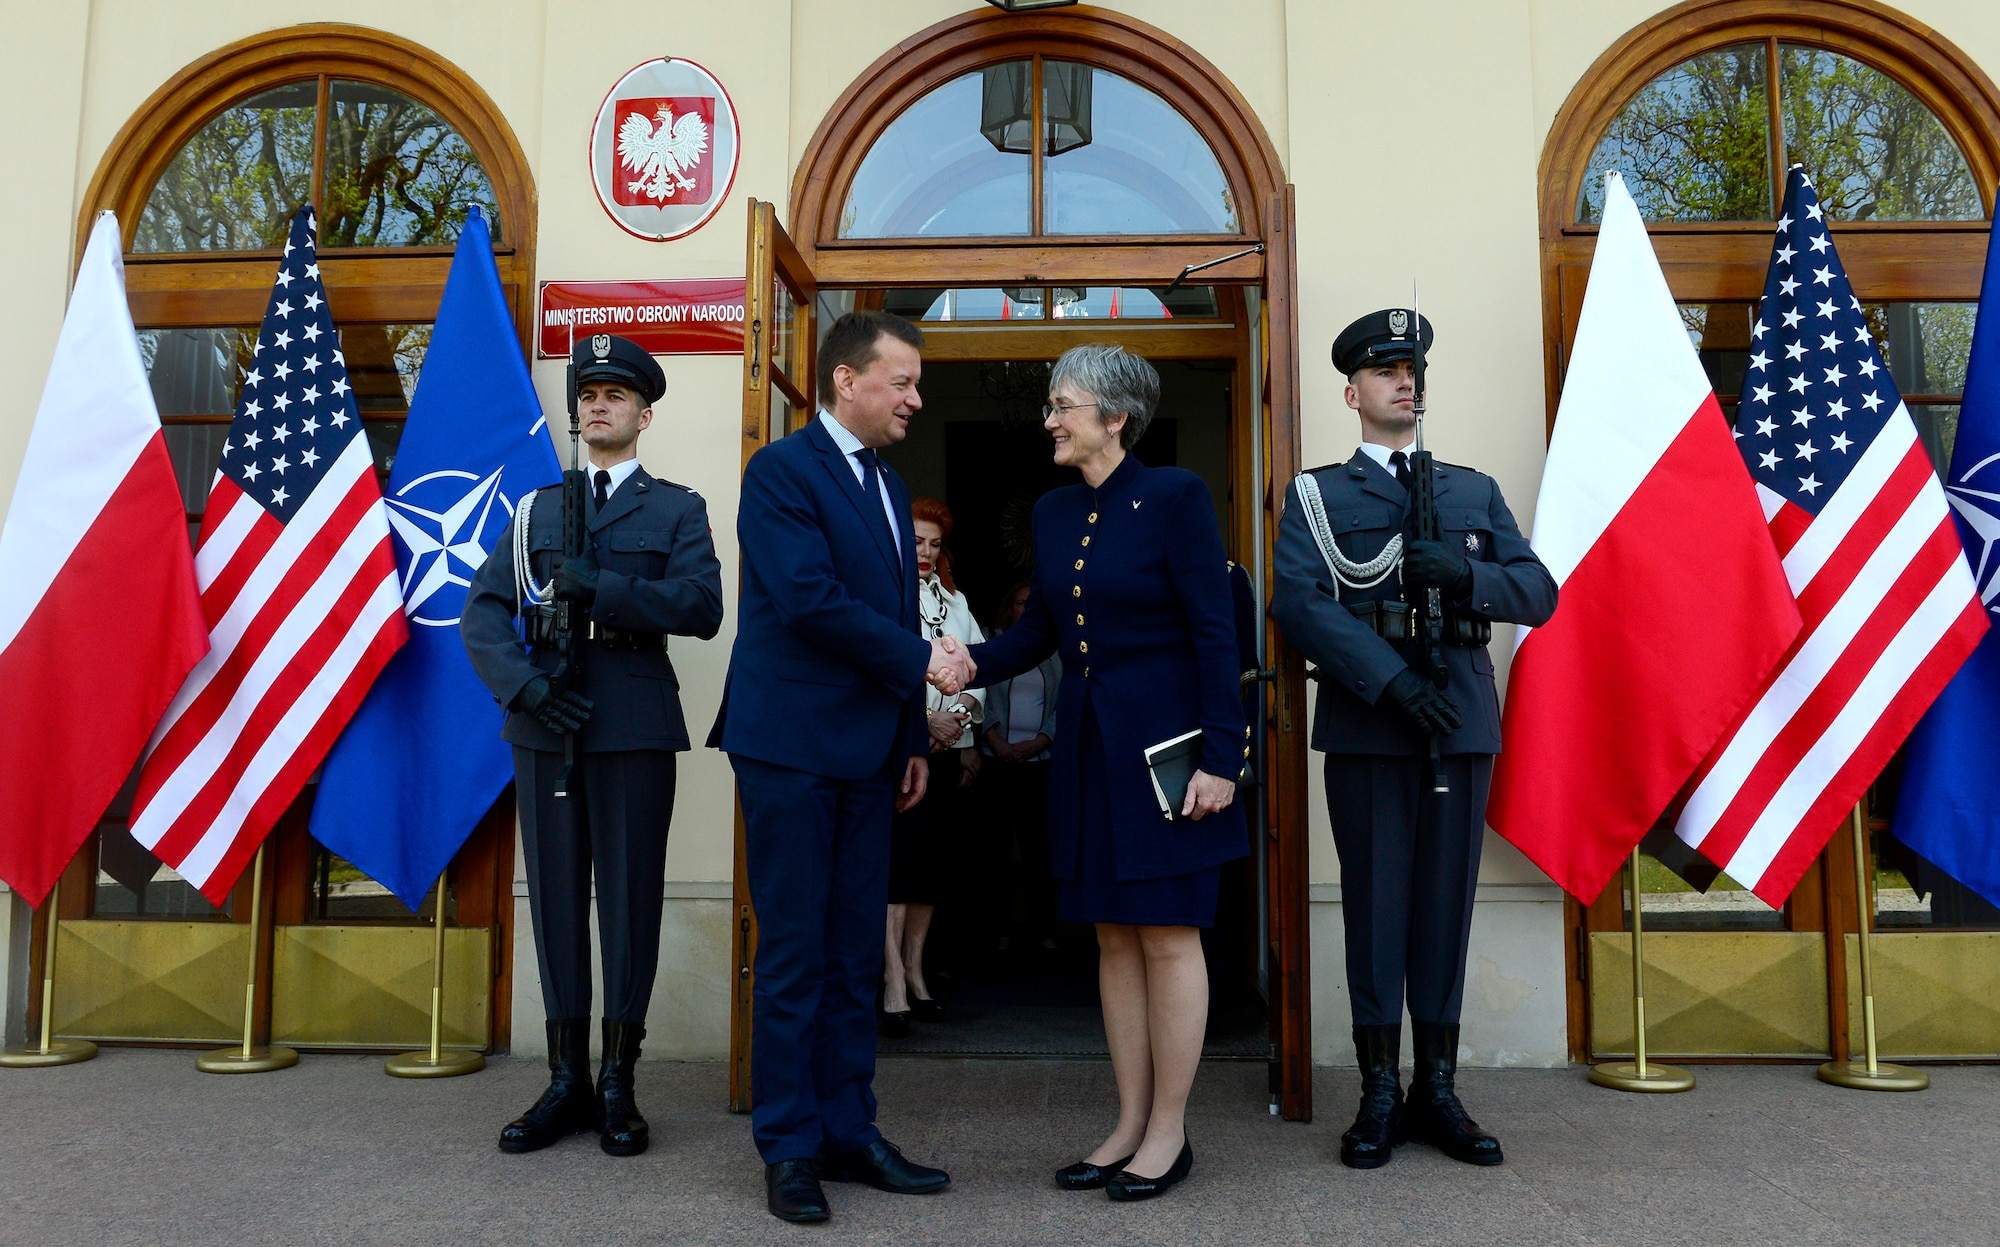 Secretary of the Air Force Heather Wilson greets the Polish Minister of Defense Mariusz Blaszczak in Warsaw, Poland, April 25, 2019. (U.S. Air Force photo by Staff Sgt. Rusty Frank)